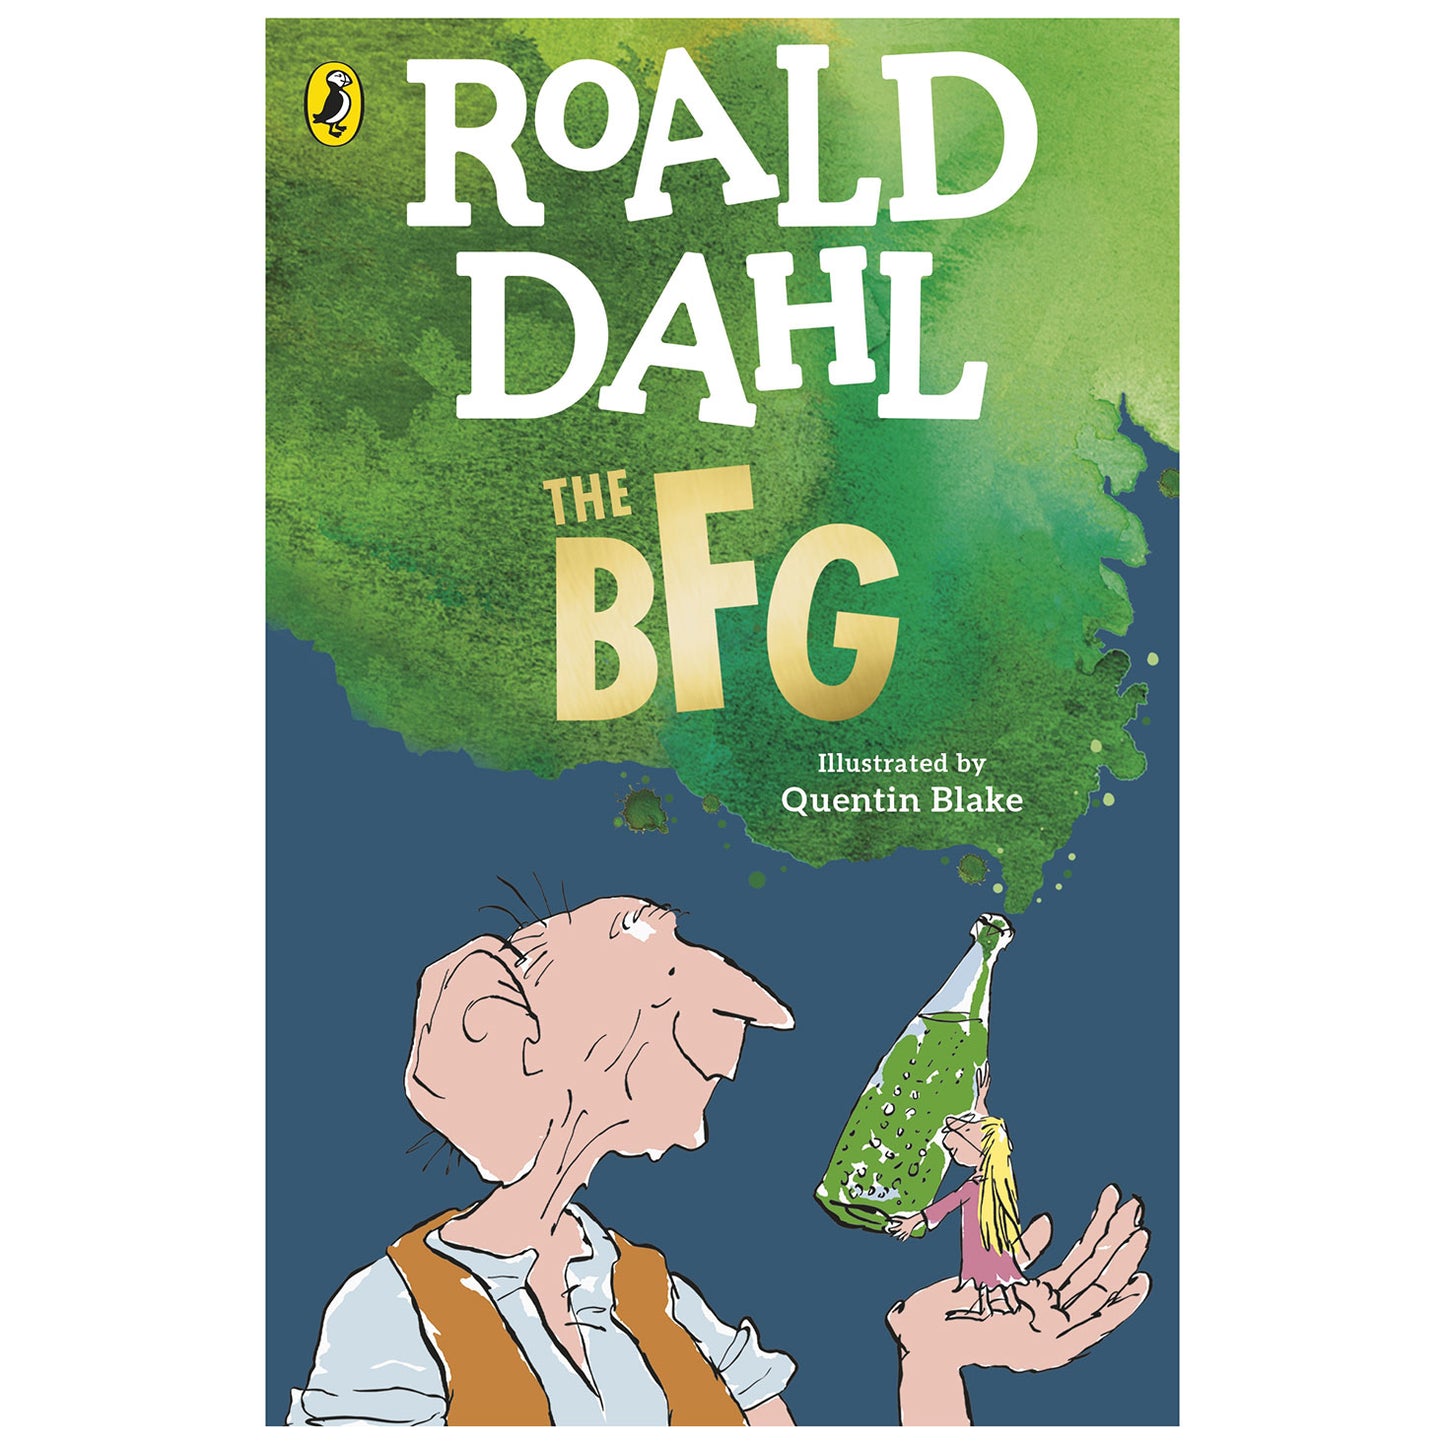 The BFG by Roald Dahl with illustrations by Quentin Blake